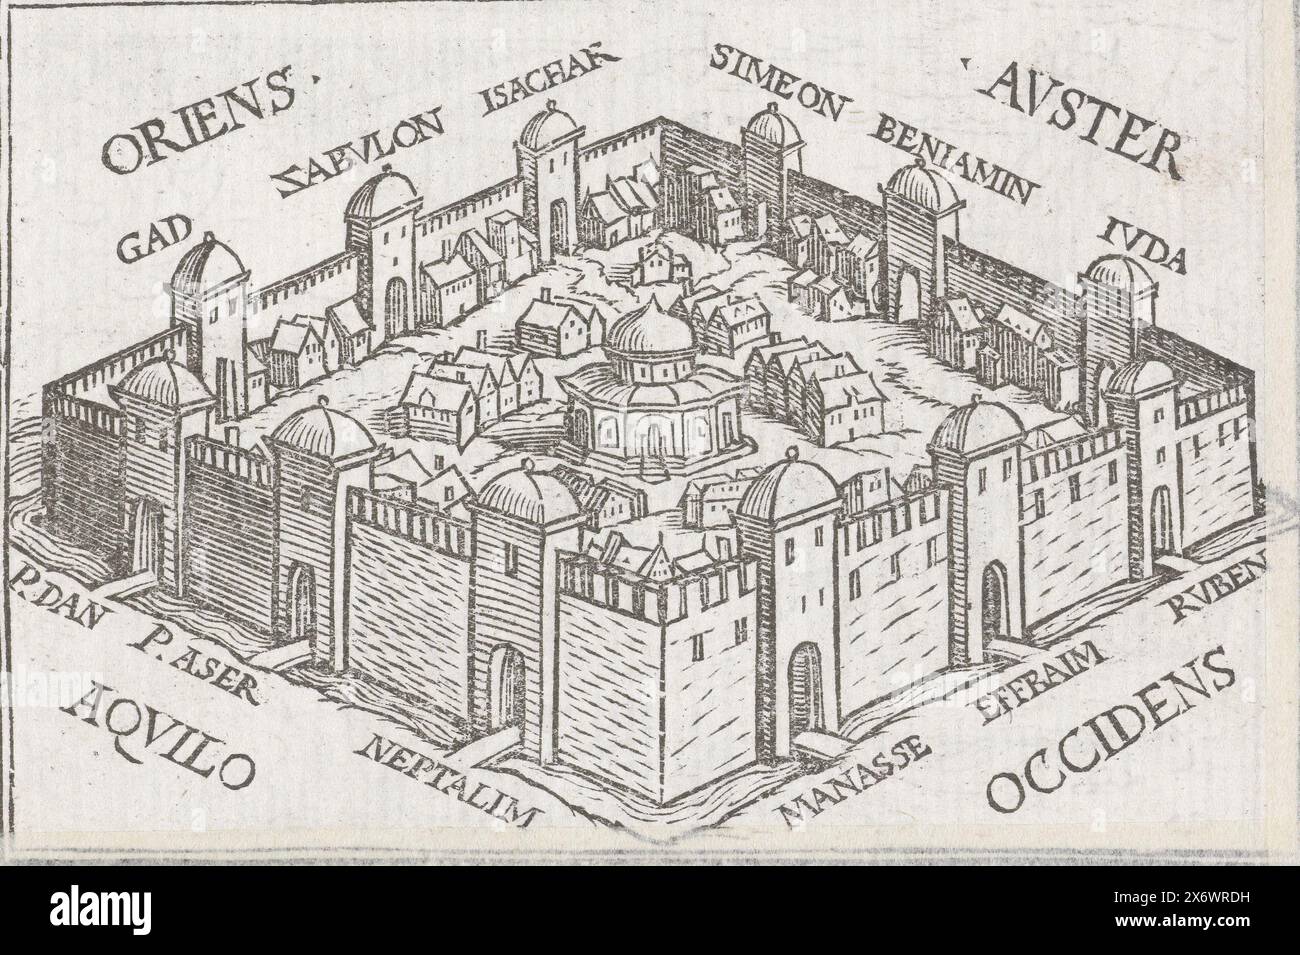 Heavenly city in vision of Ezekiel, The heavenly city with the new temple as Ezekiel sees it in a vision. The cardinal directions are indicated and the gates are labeled with the names of the tribes of Israel. In the margin above the image is the text Ezek. XLVII. Stock Photo